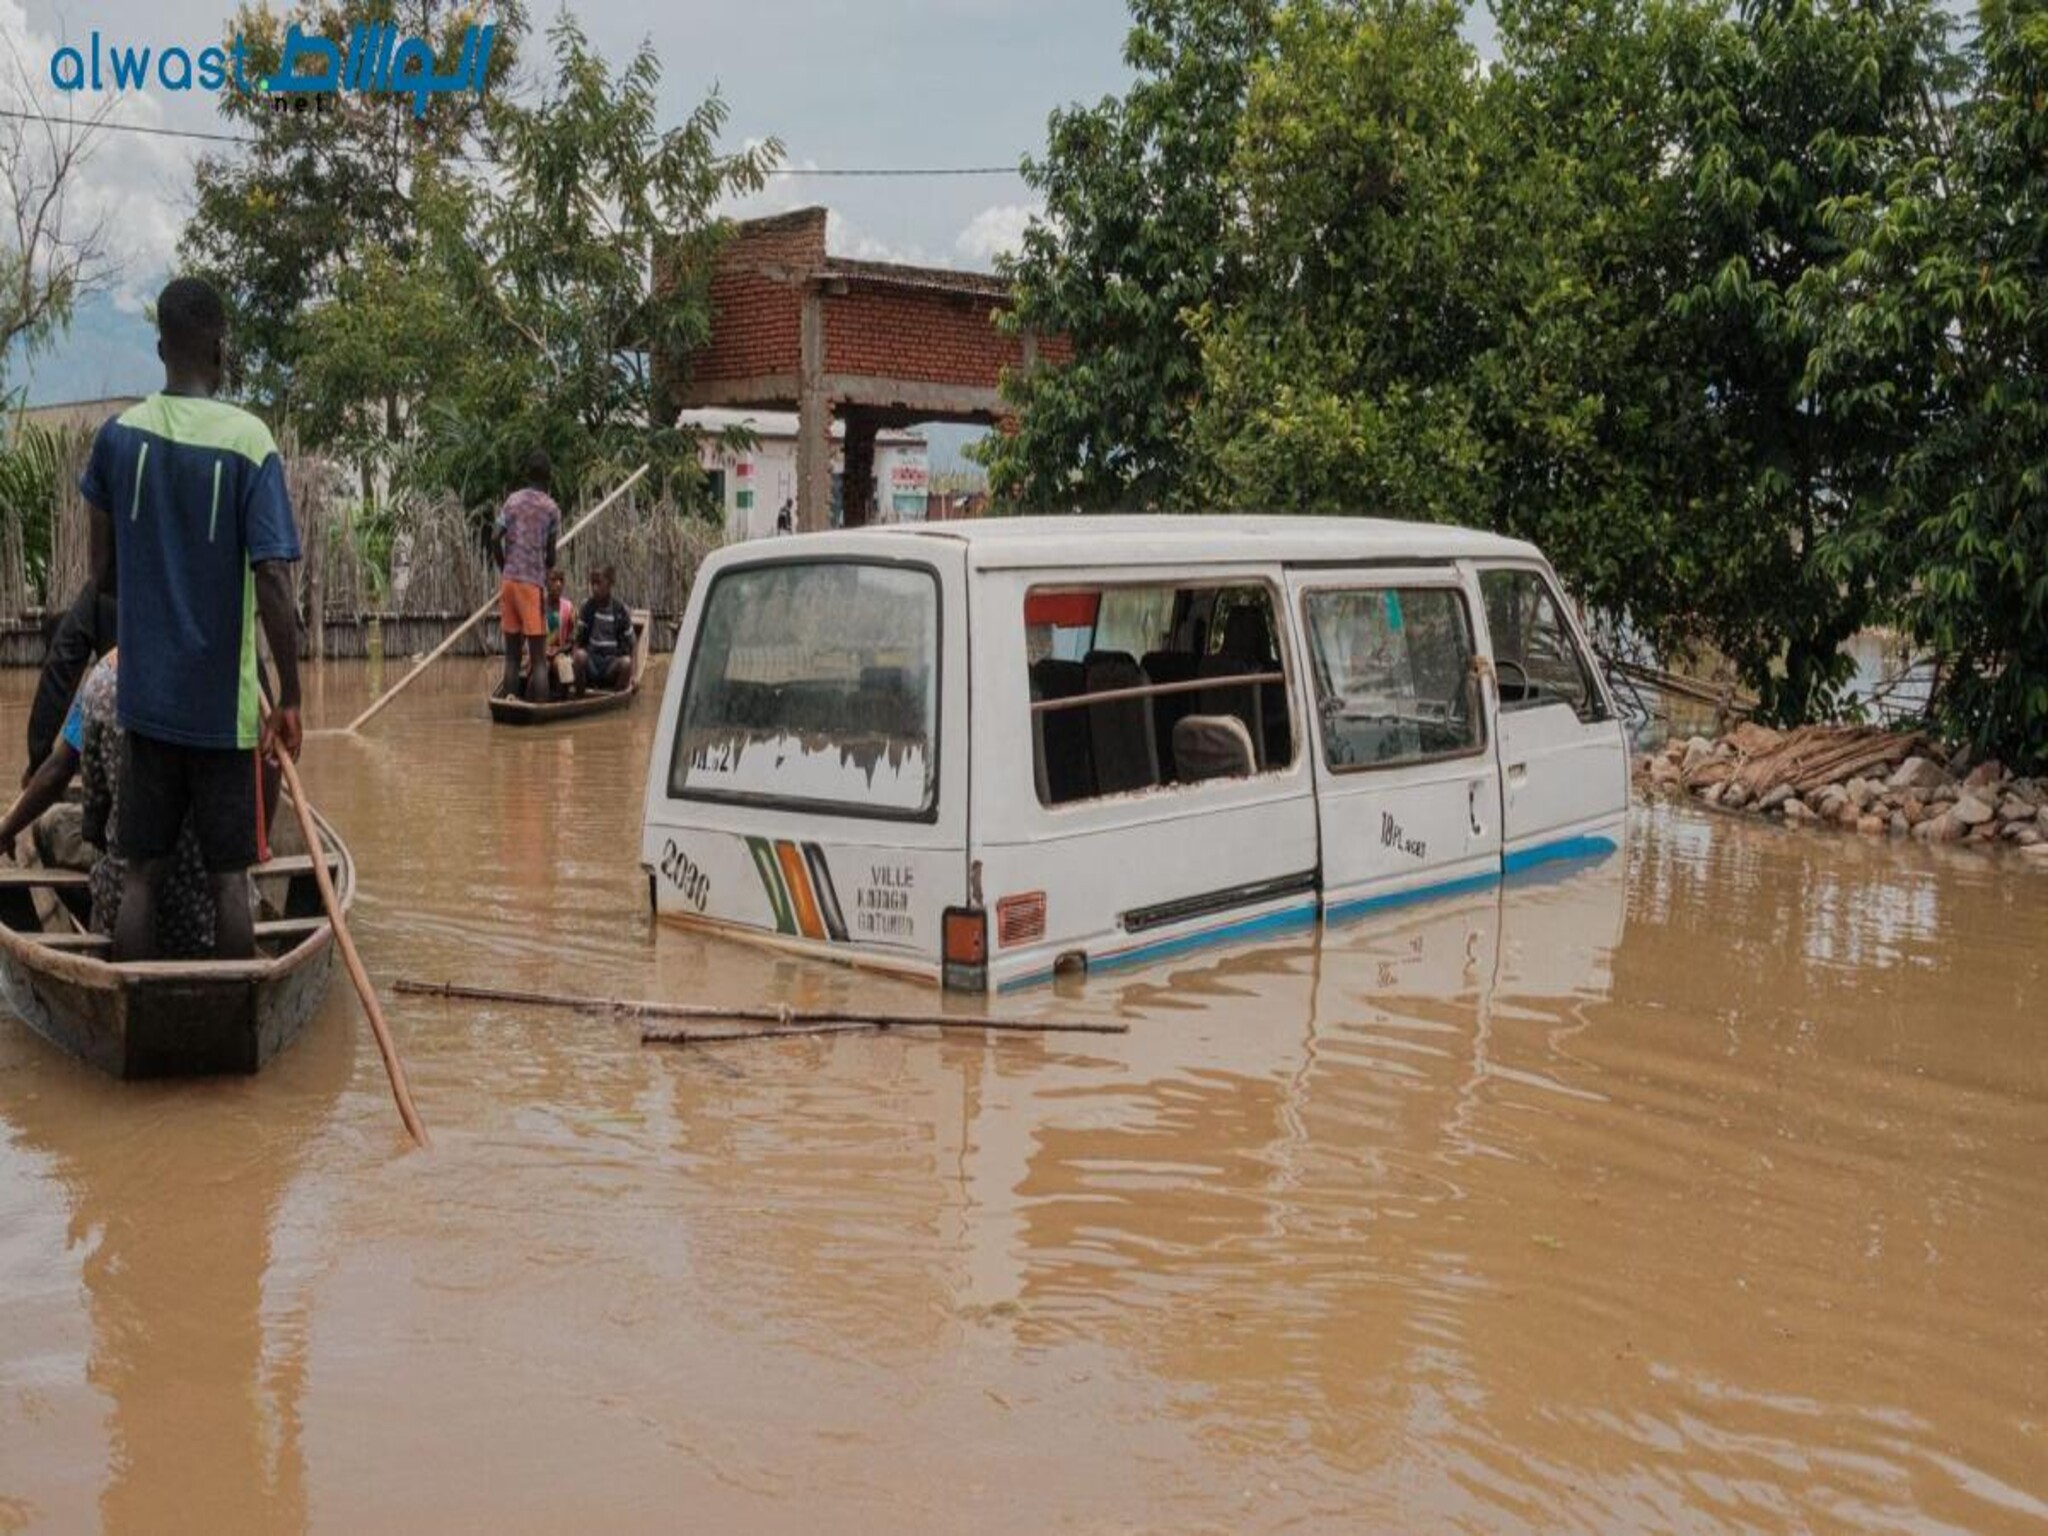 Tanzania Tragedy: 155 dead from Floods and Landslides